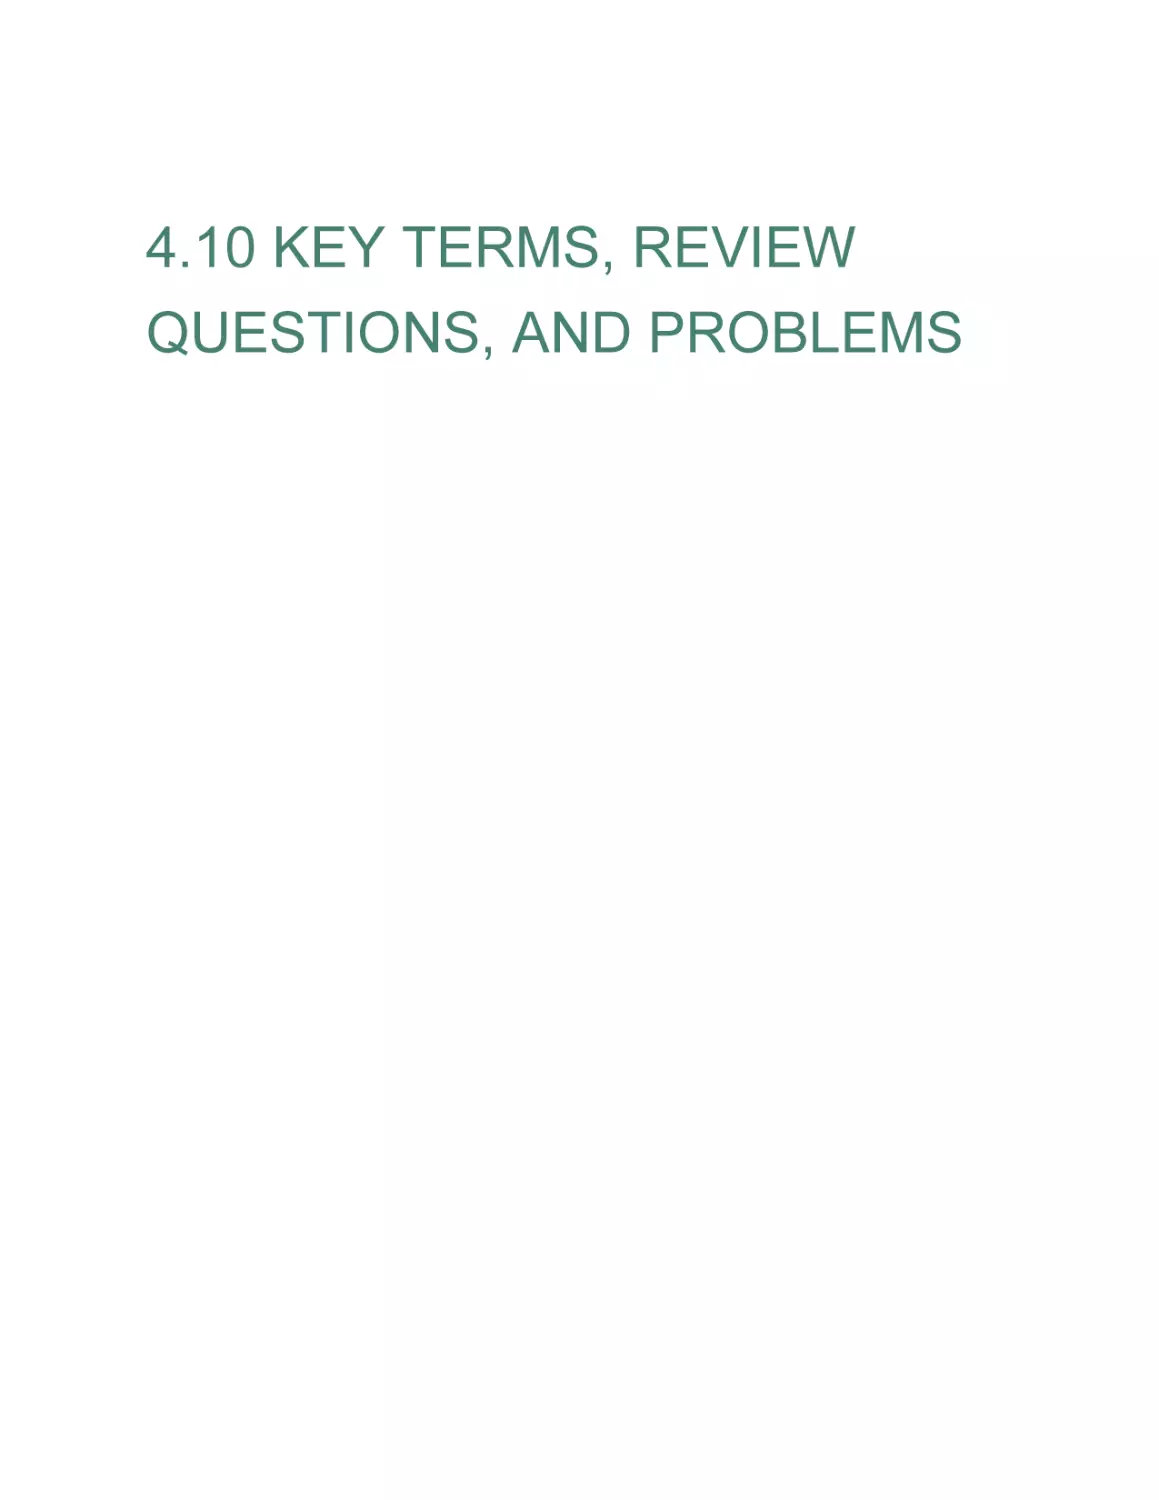 4.10 KEY TERMS, REVIEW QUESTIONS, AND PROBLEMS